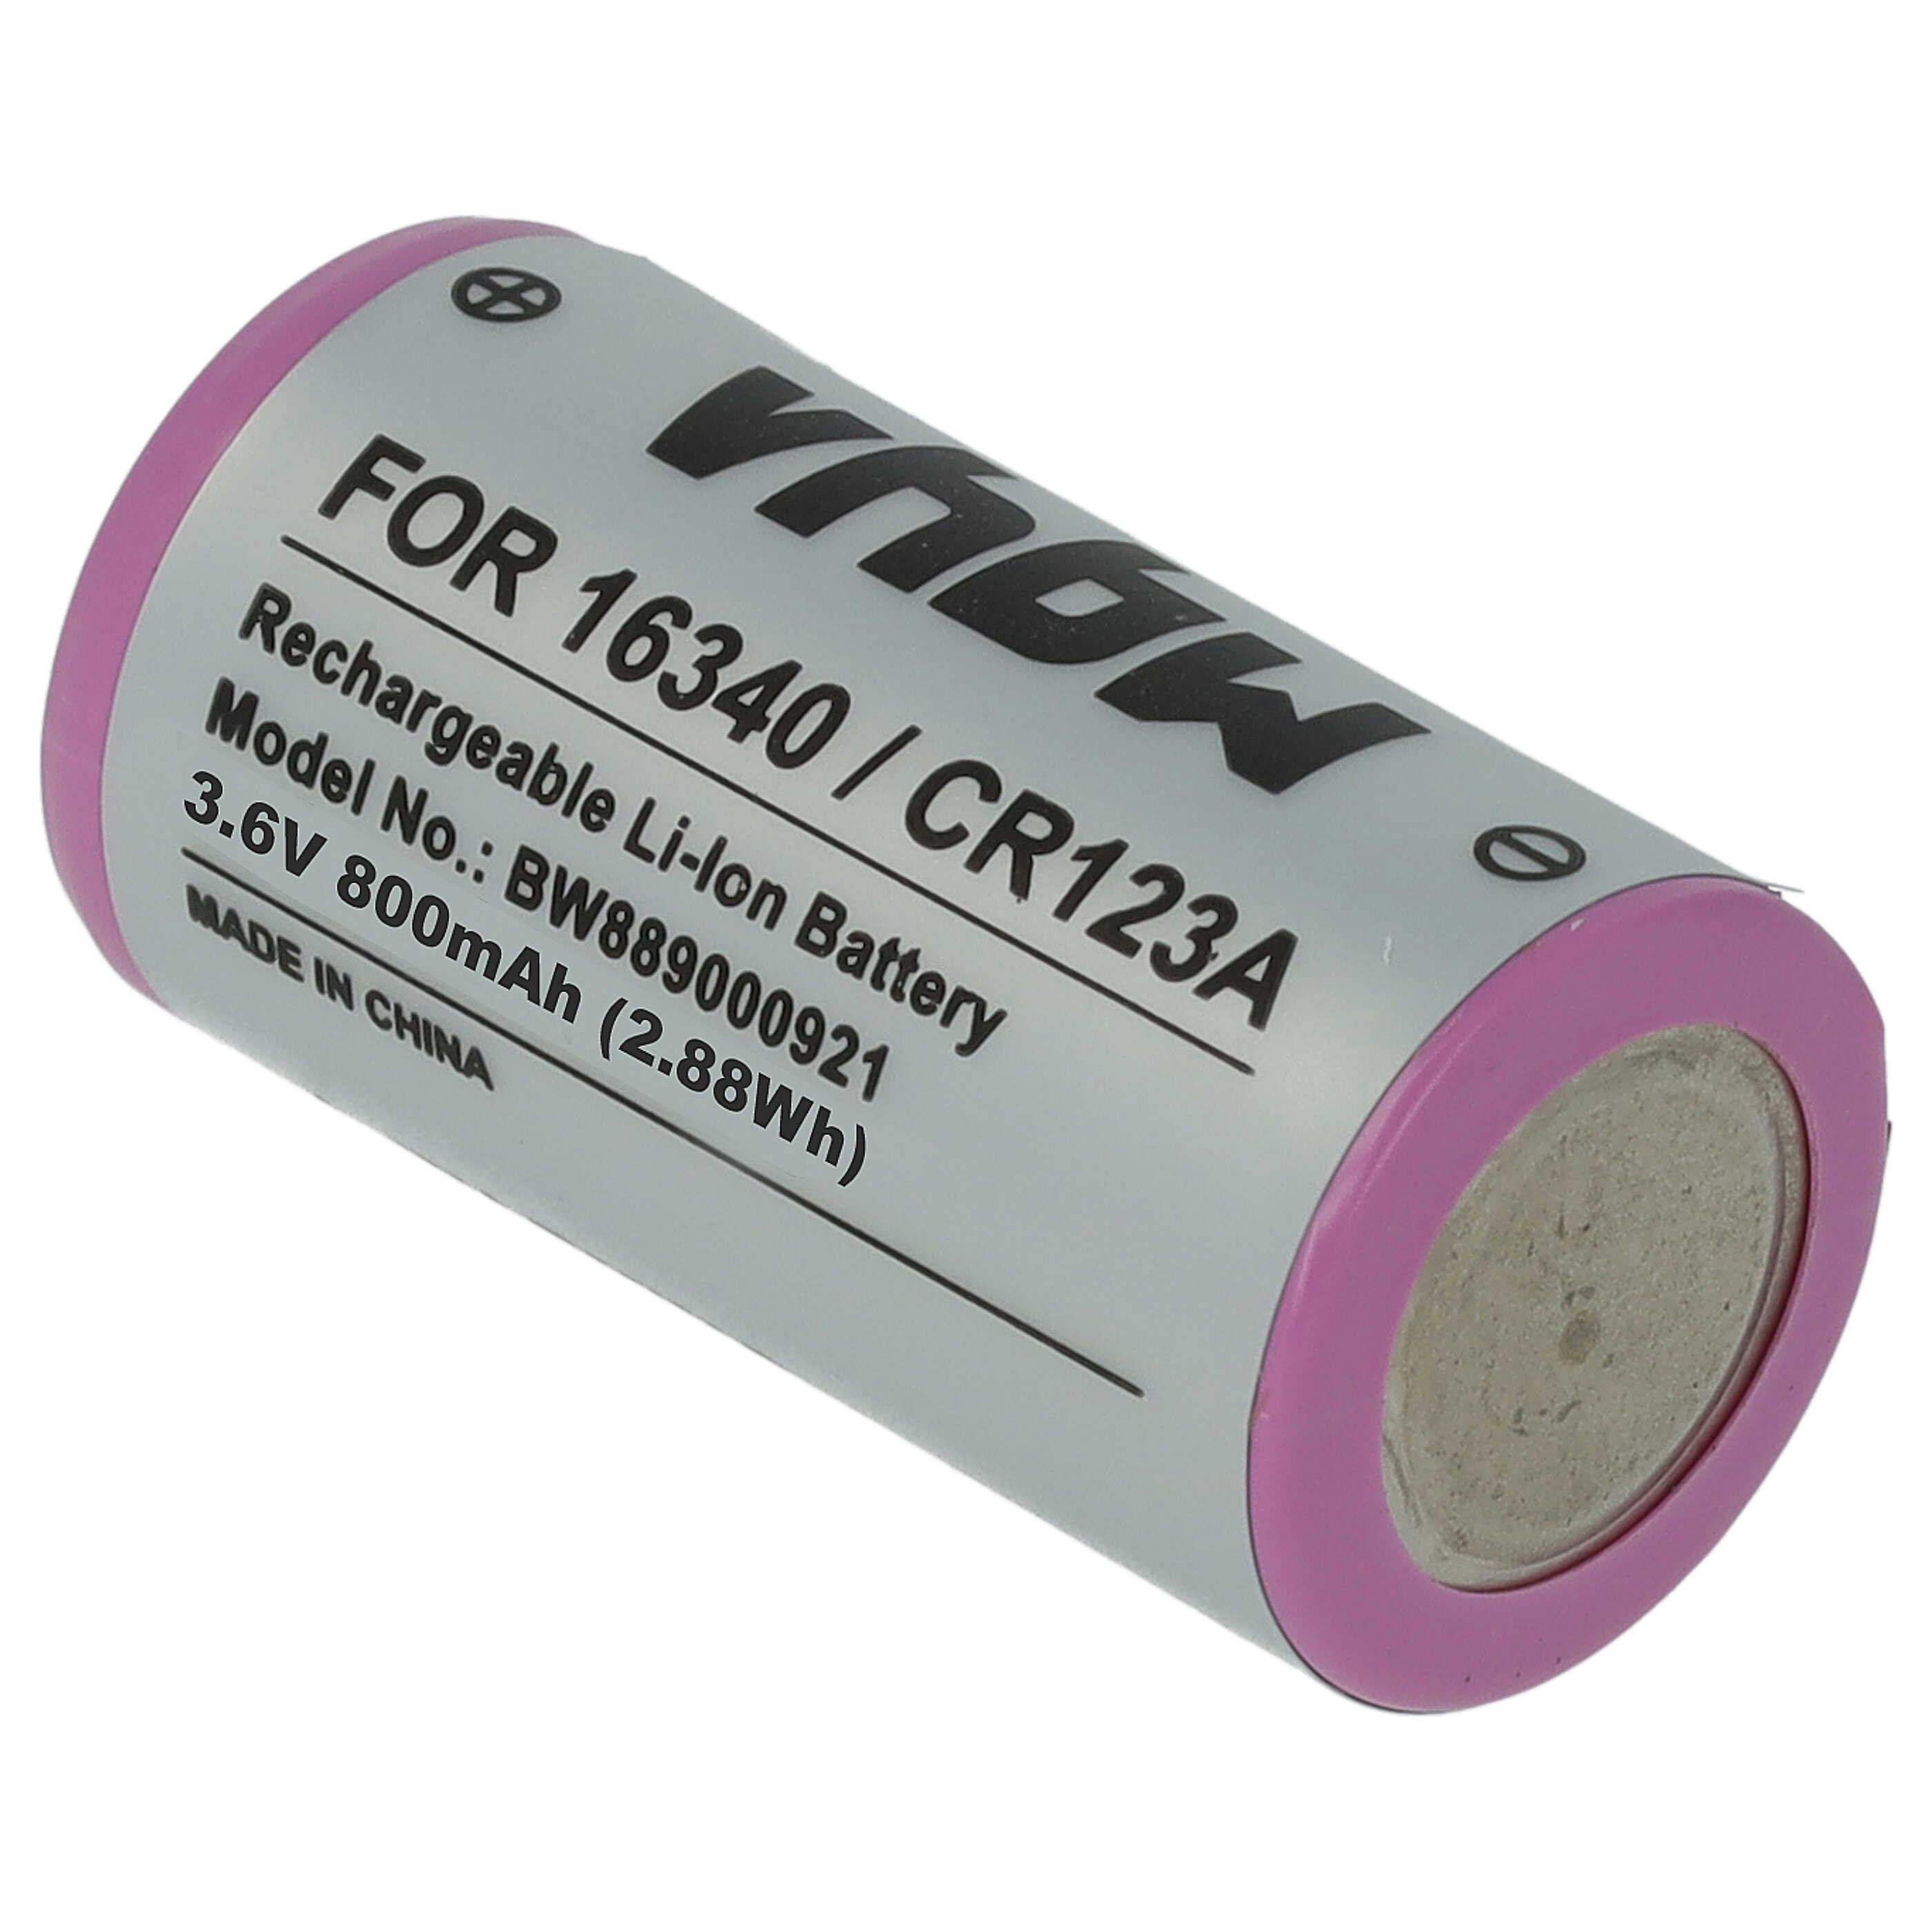 Universal Battery (5 Units) Replacement for 16340, CR123R, CR17335, CR17345, CR123A - 800mAh 3.6V Li-Ion